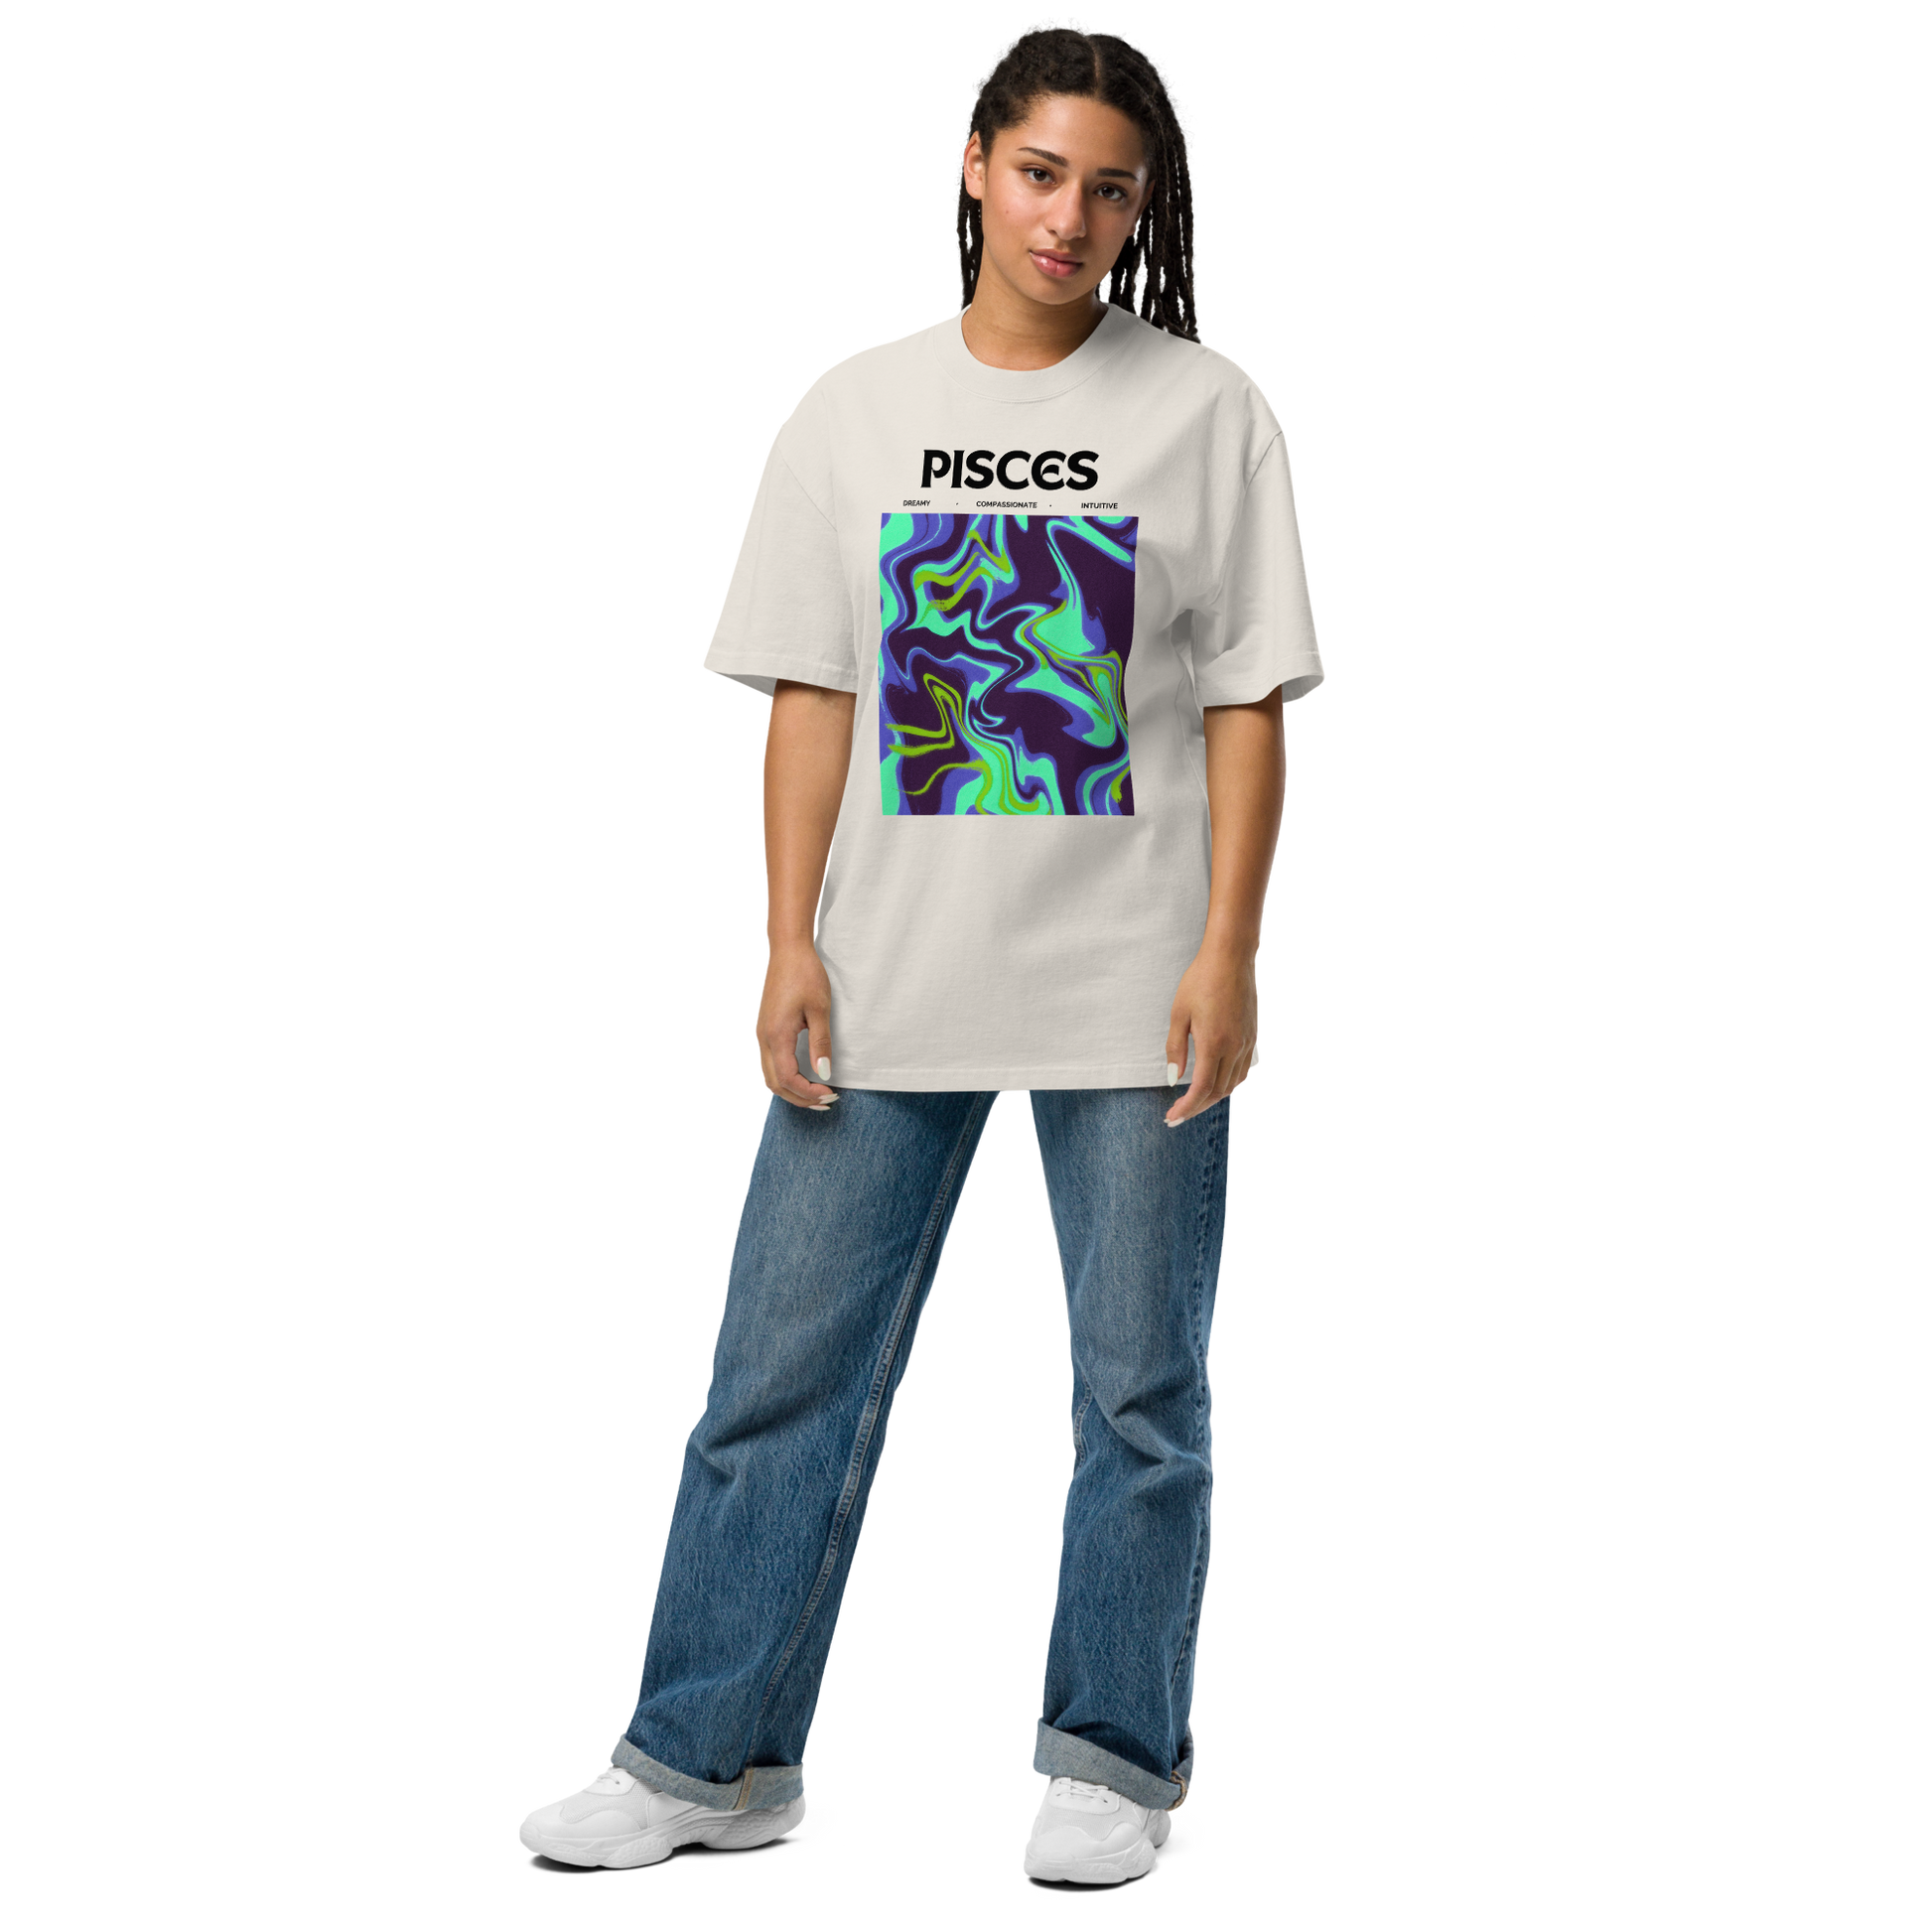 Woman wearing a Faded Bone Pisces Oversized T-Shirt featuring an Abstract Pisces Star Sign graphic on the chest - Cool Graphic Zodiac Oversized Tees - Boozy Fox